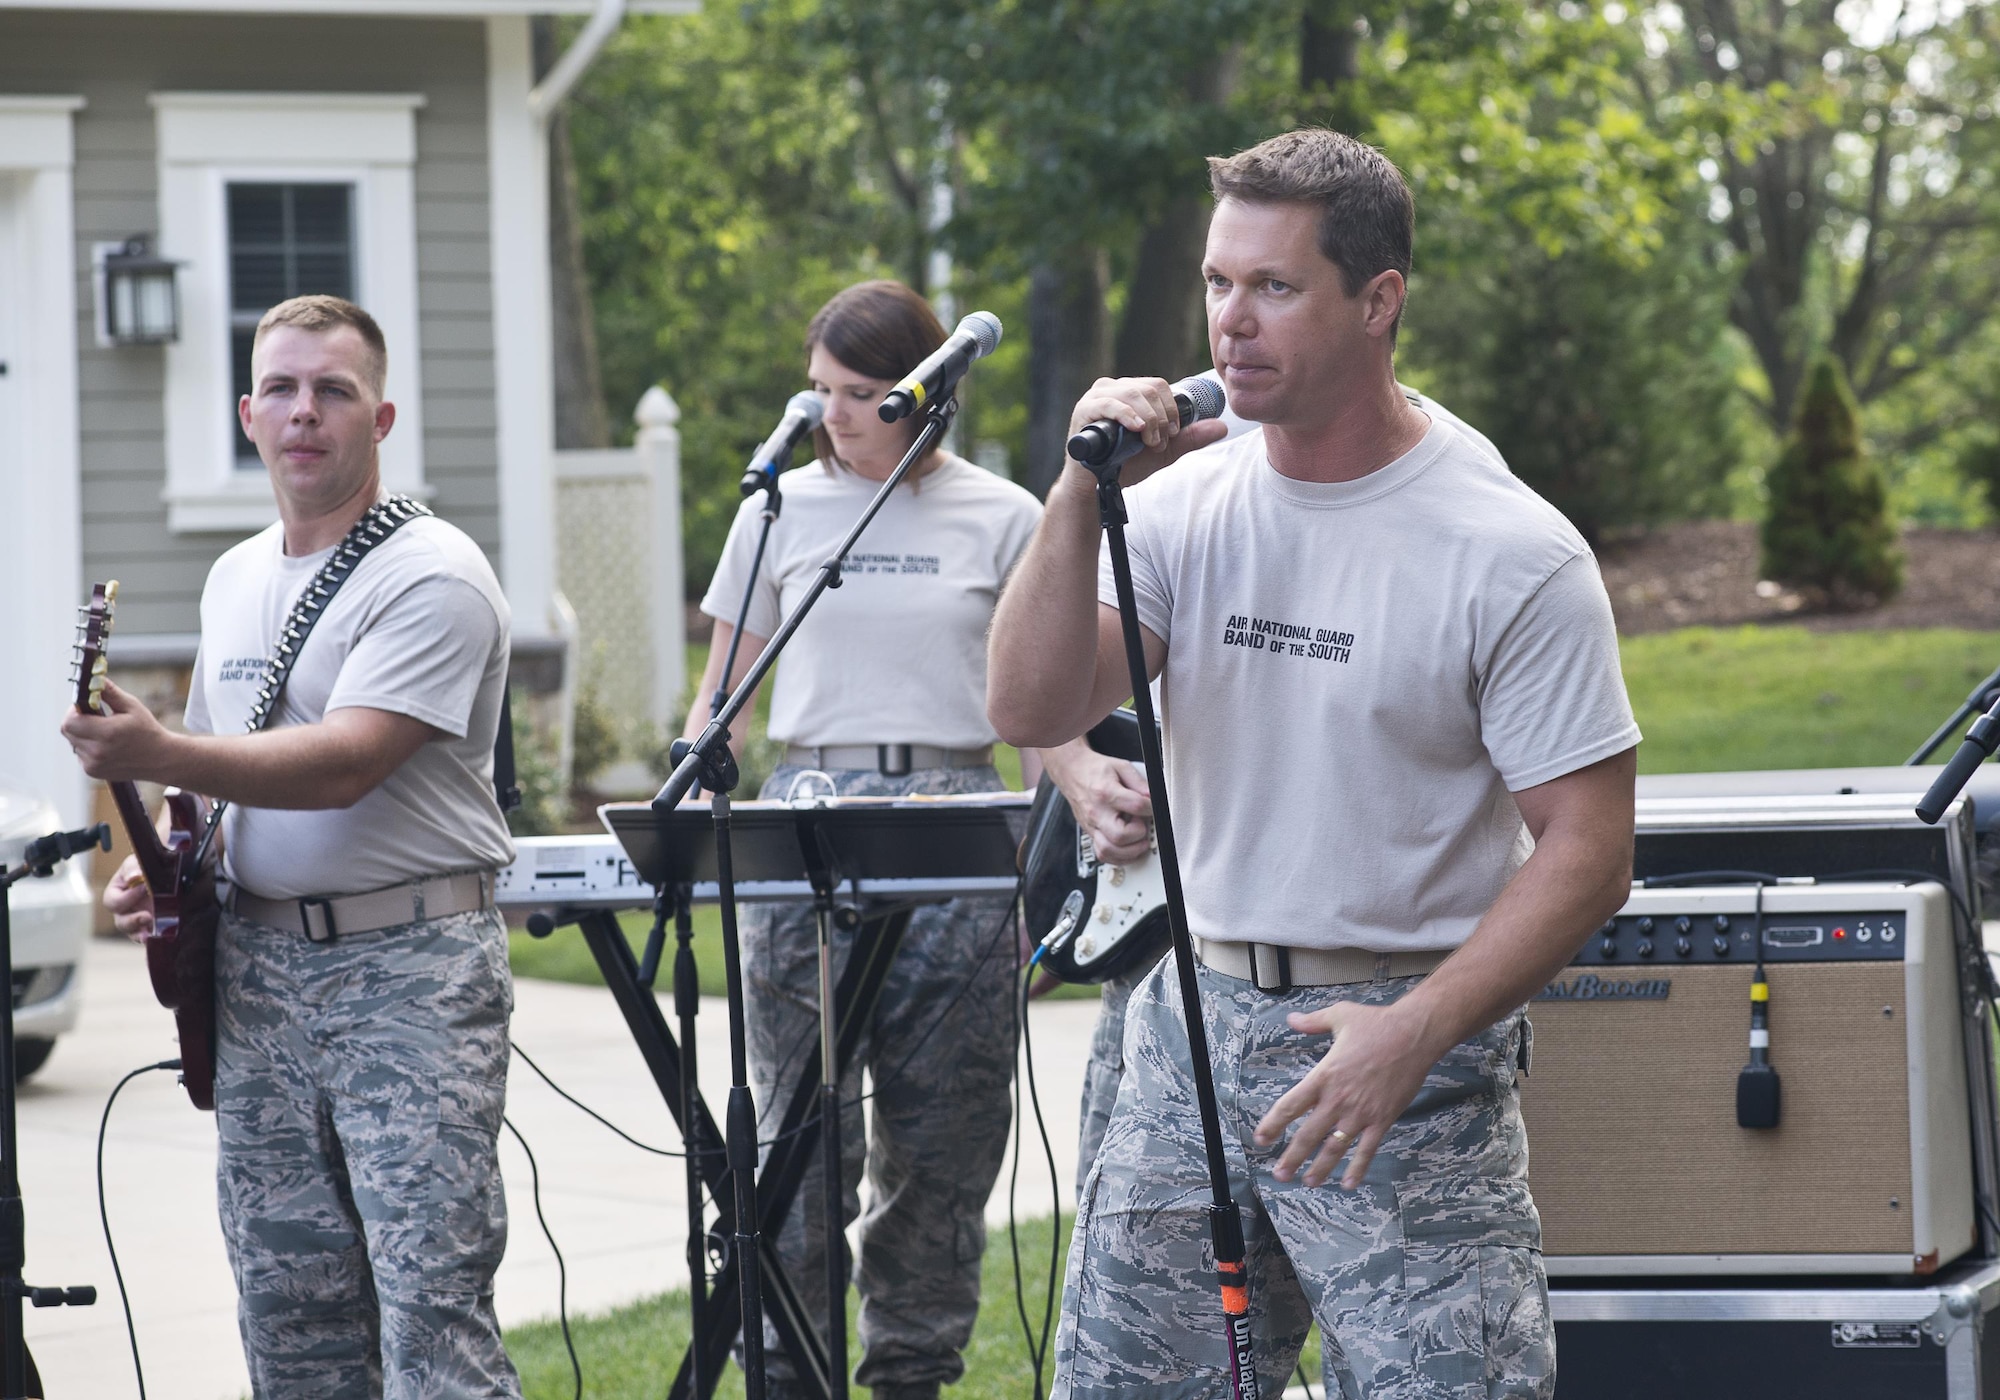 The Air National Guard Band of the South rocks out at the ANG Command Chief's Barbecue during Focus on the Force Week on Joint Base Andrews, Md., August 4, 2016. Focus on the Force Week is a series of events highlighting the importance of professional development for Airmen at all levels and celebrating the accomplishments of the enlisted corps. (U.S. Air National Guard photo by Staff Sgt. John Hillier)